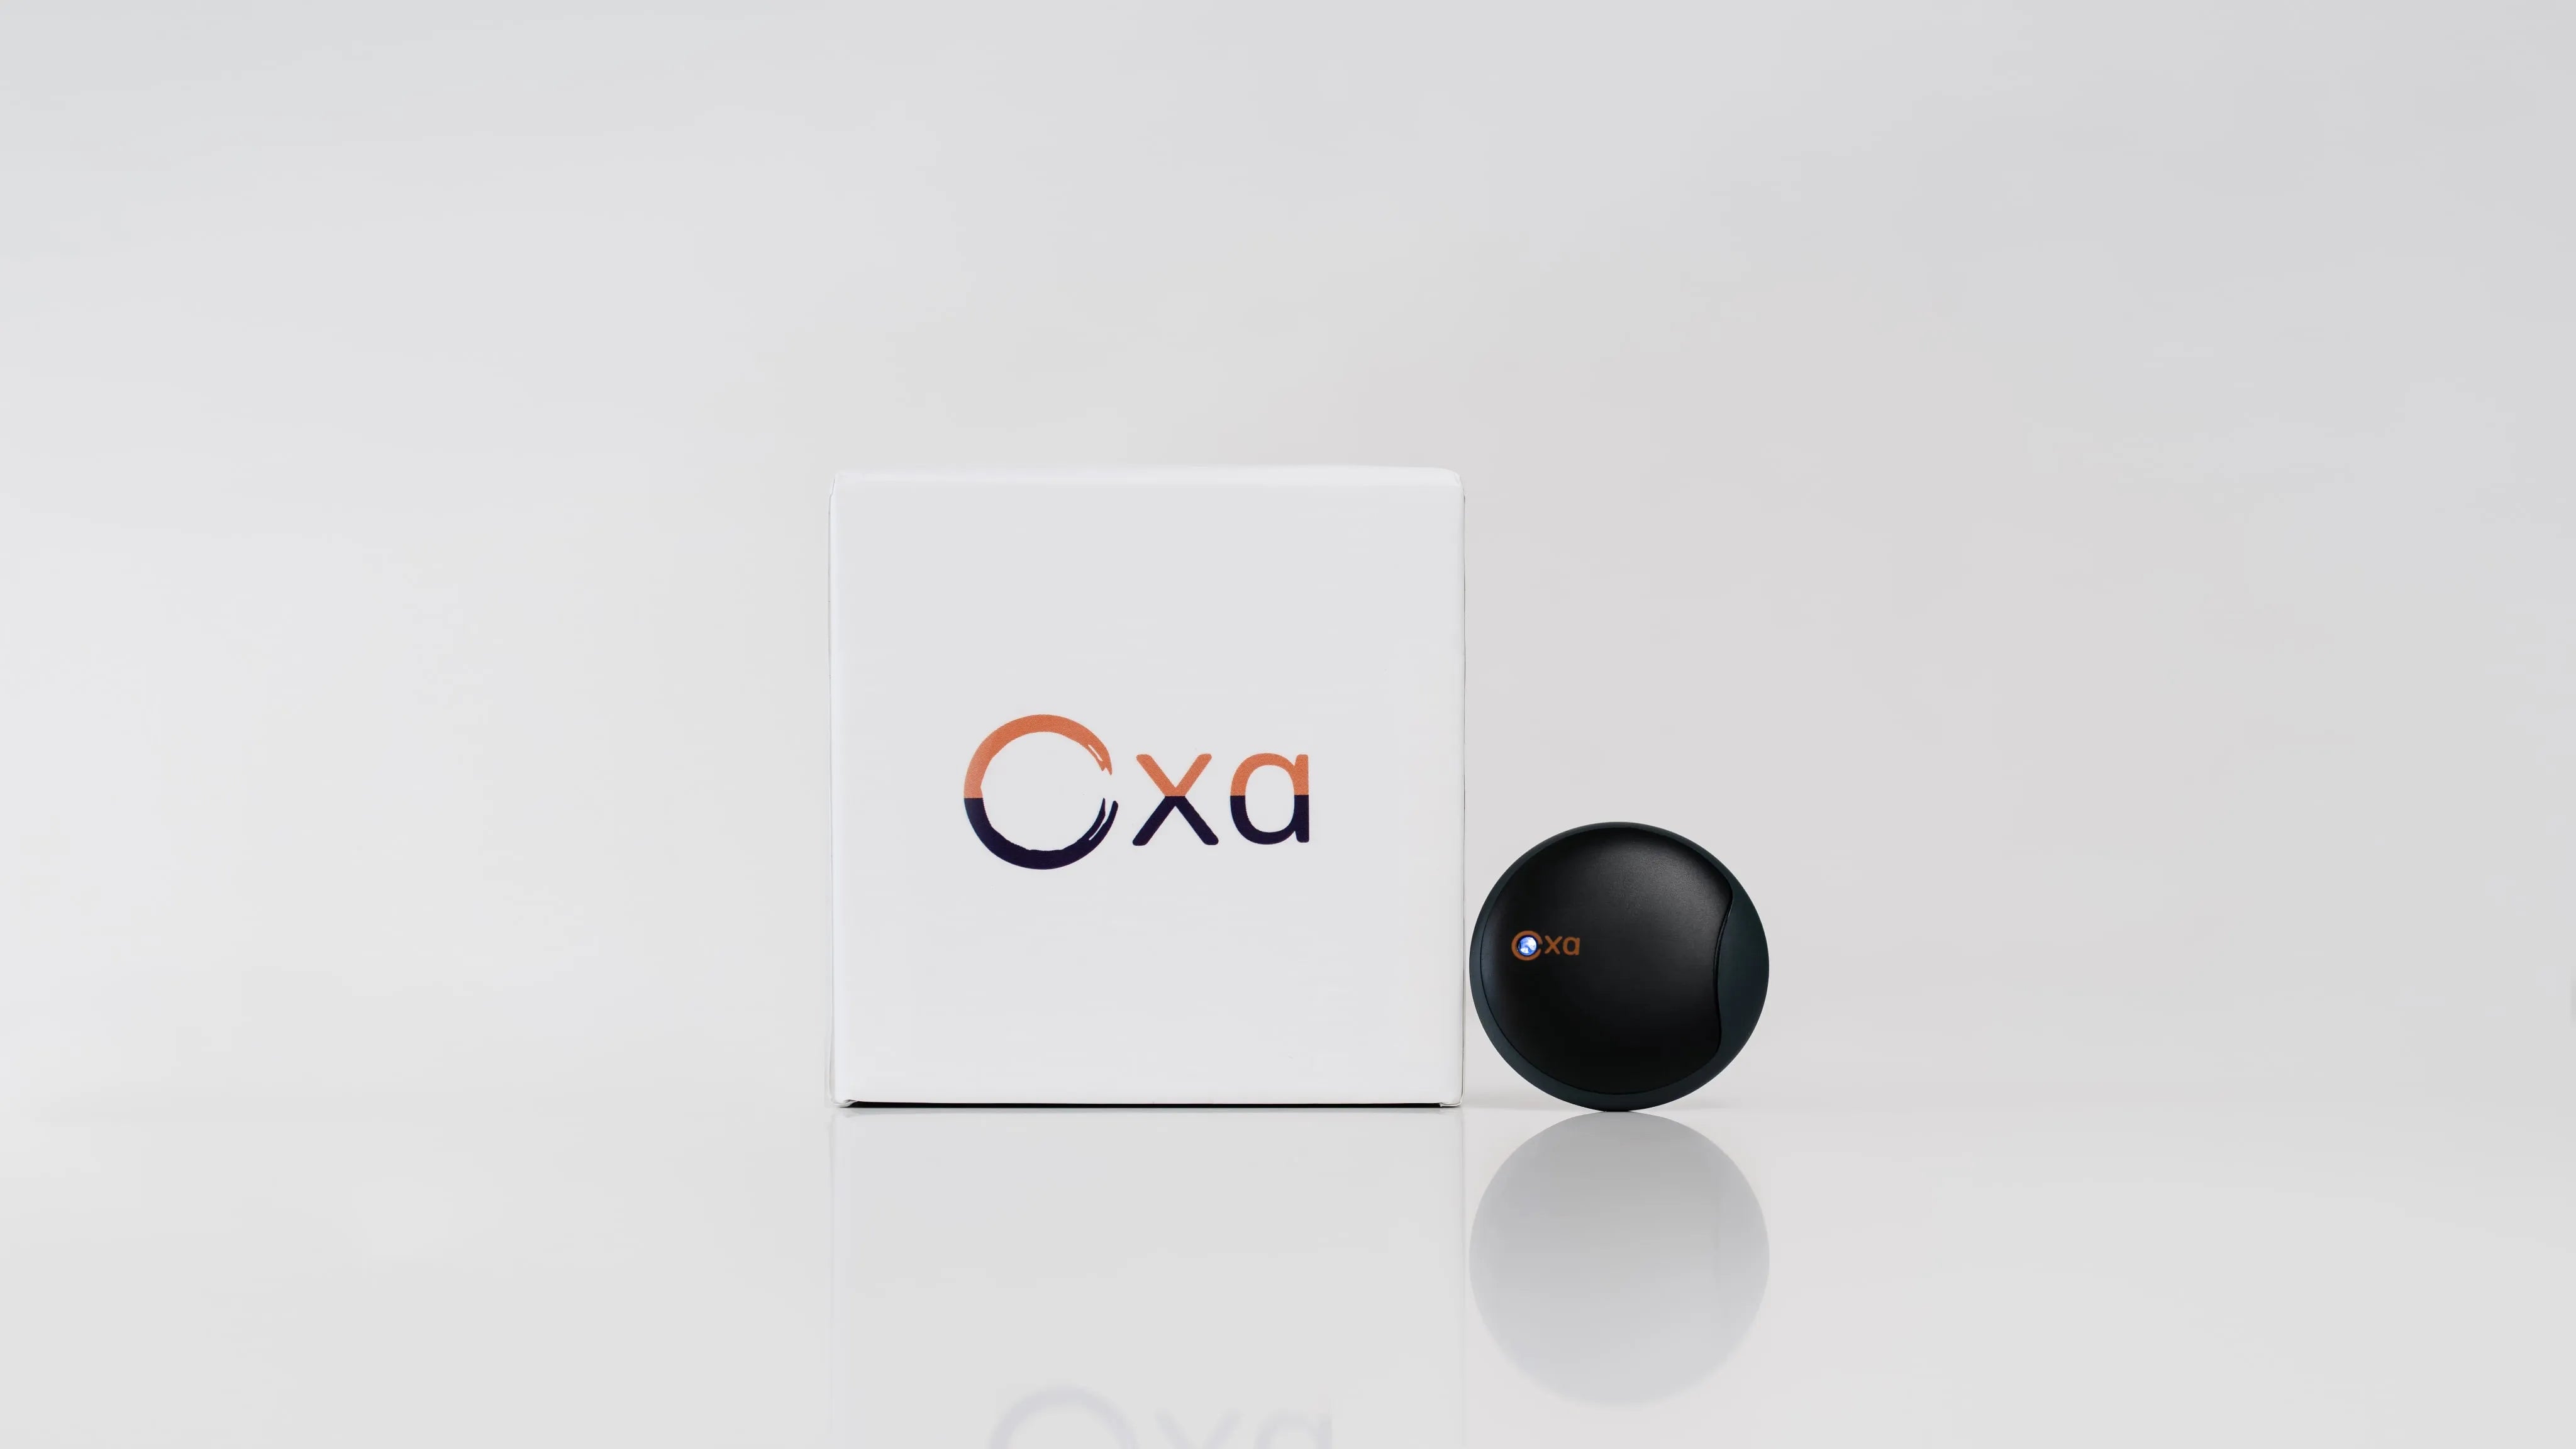  An image that shows the Oxa breathing exercise device next to a branded box